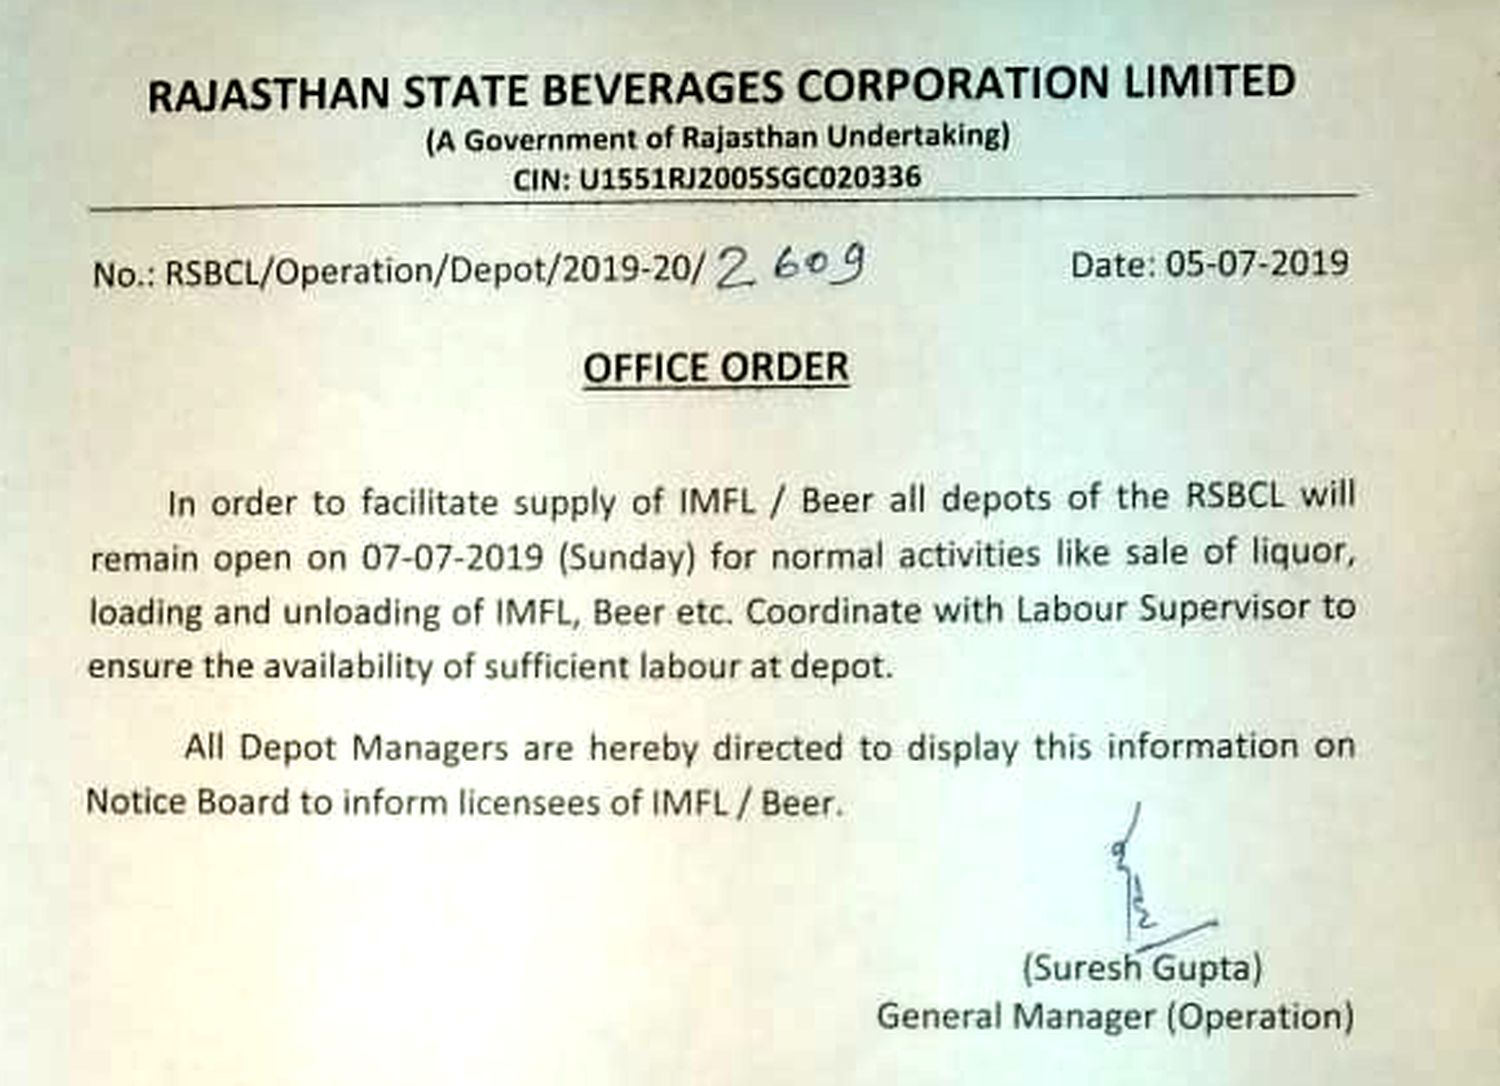 Exploitation of Human Rights of Liquor Depot workers